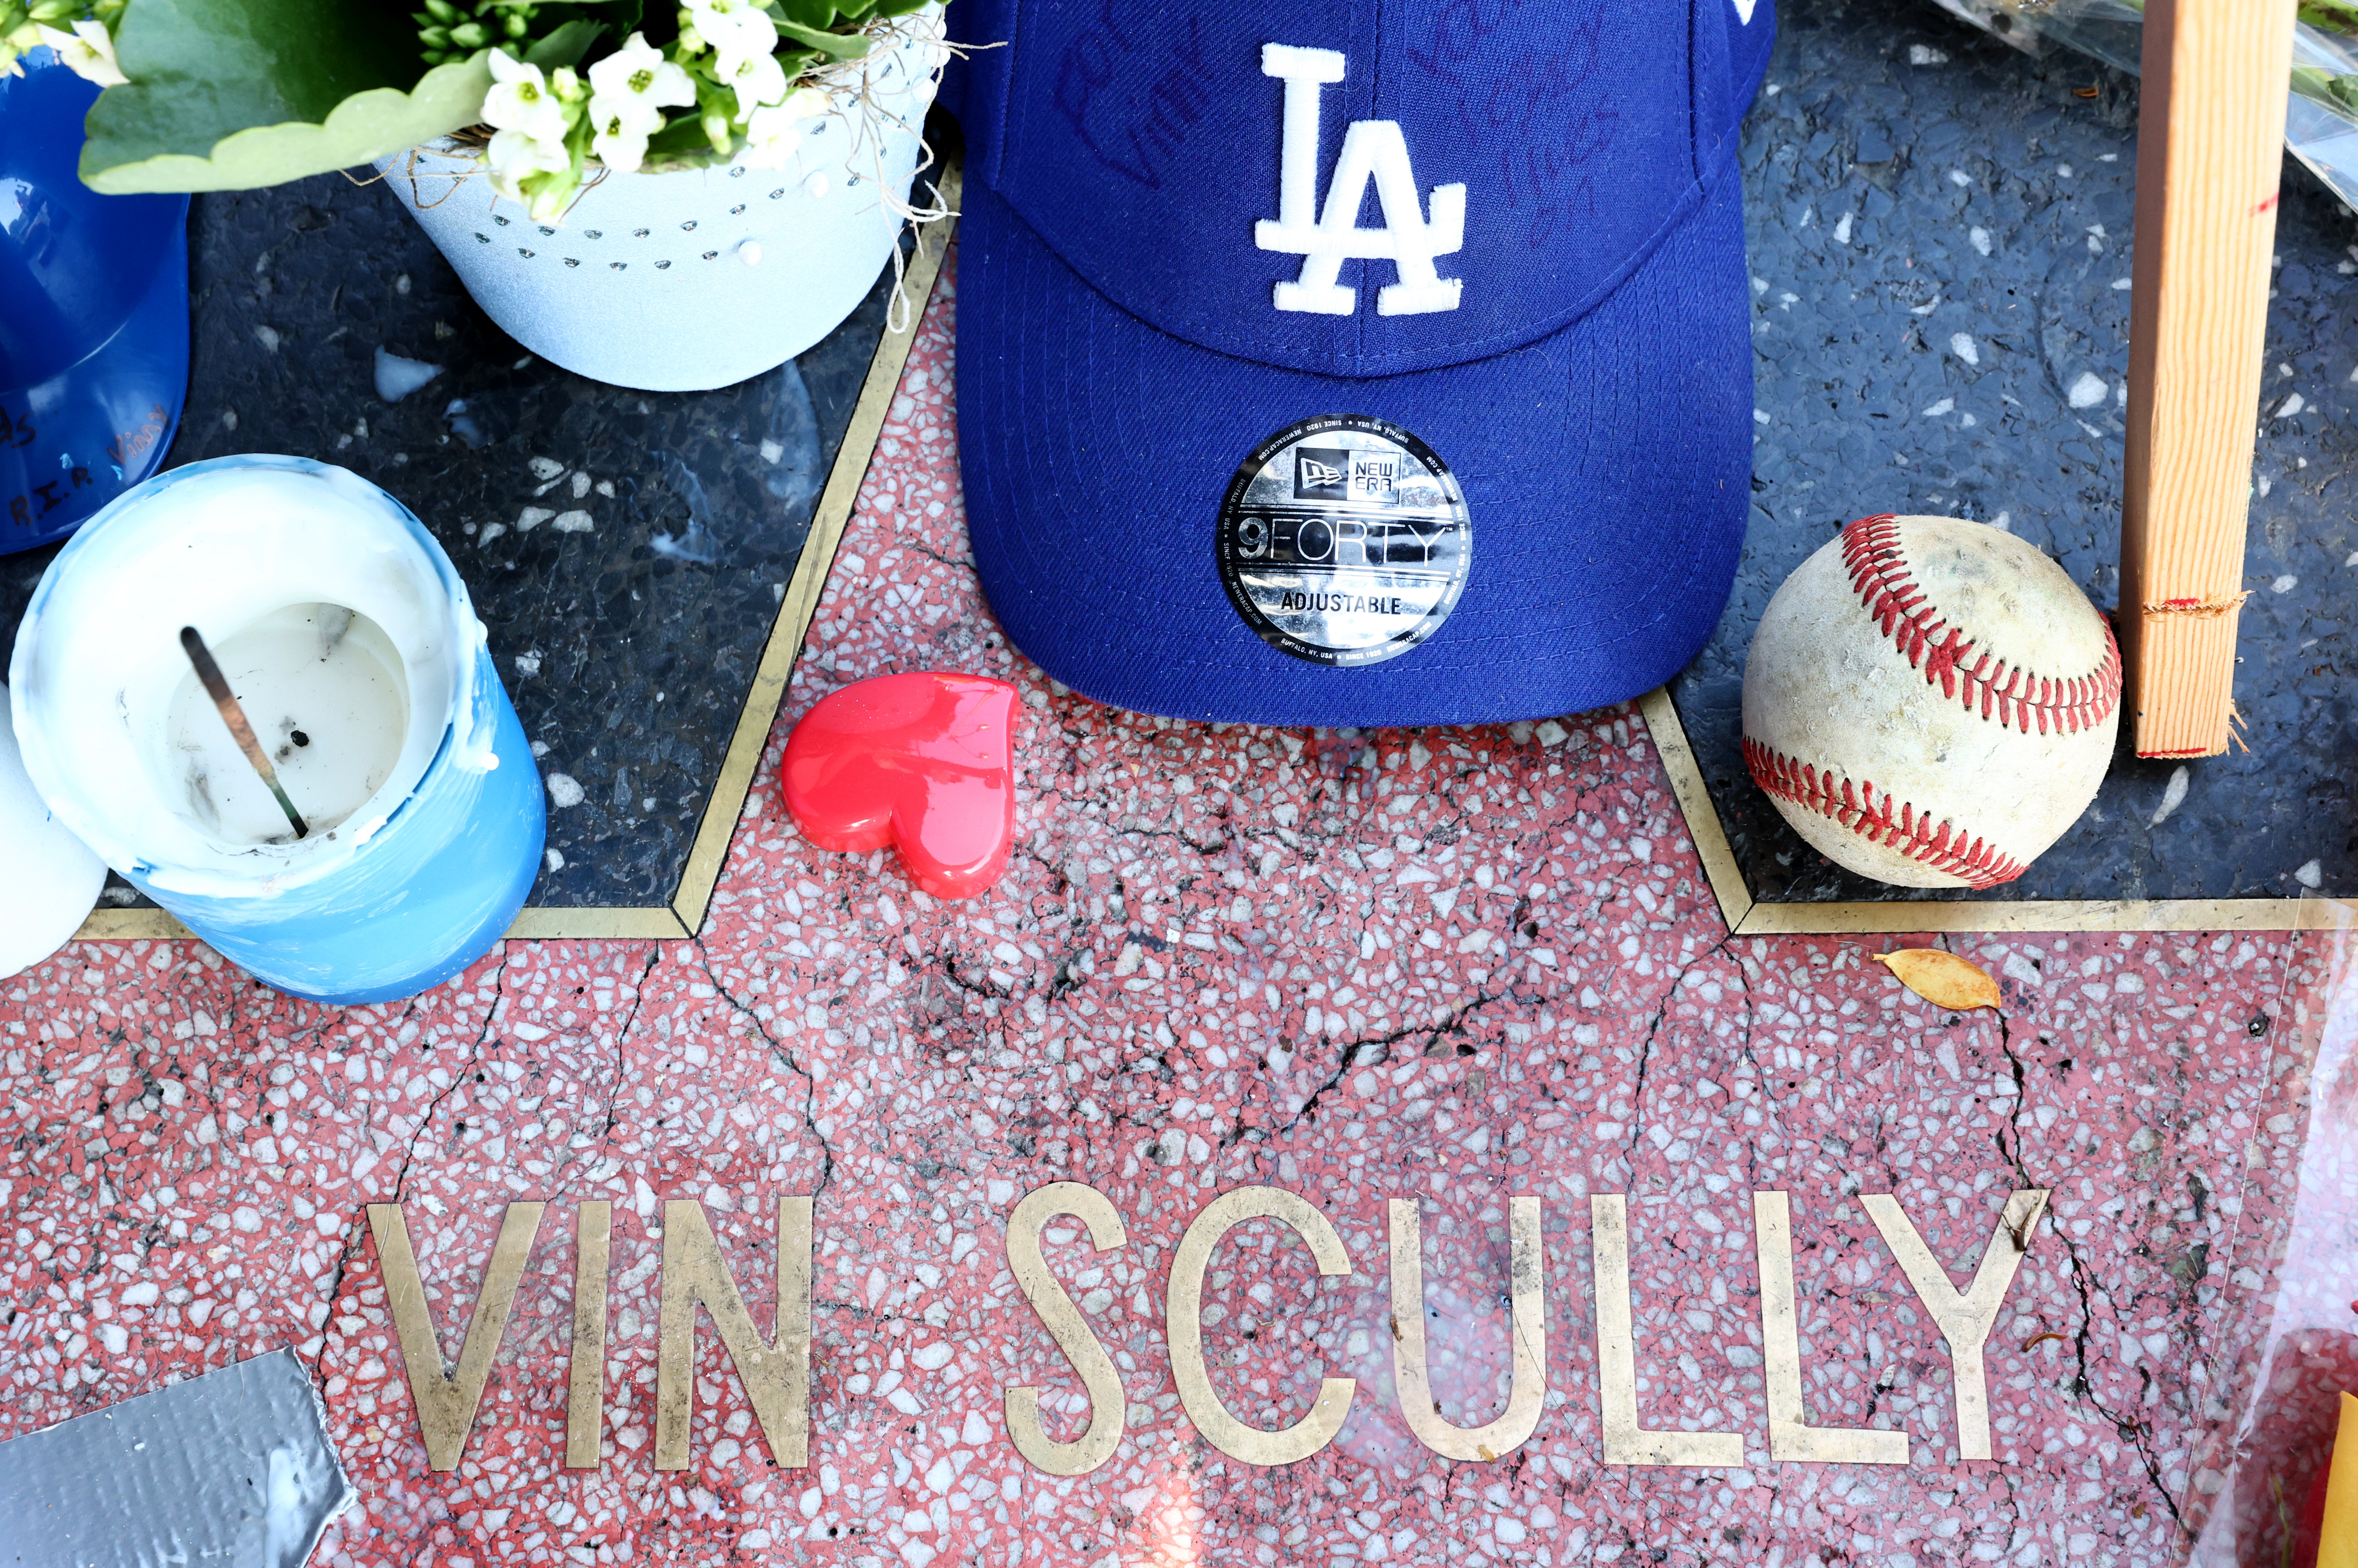 People Pay Tribute To Iconic Los Angeles Dodgers Announcer Vin Scully At His Star On The Hollywood Walk Of Fame